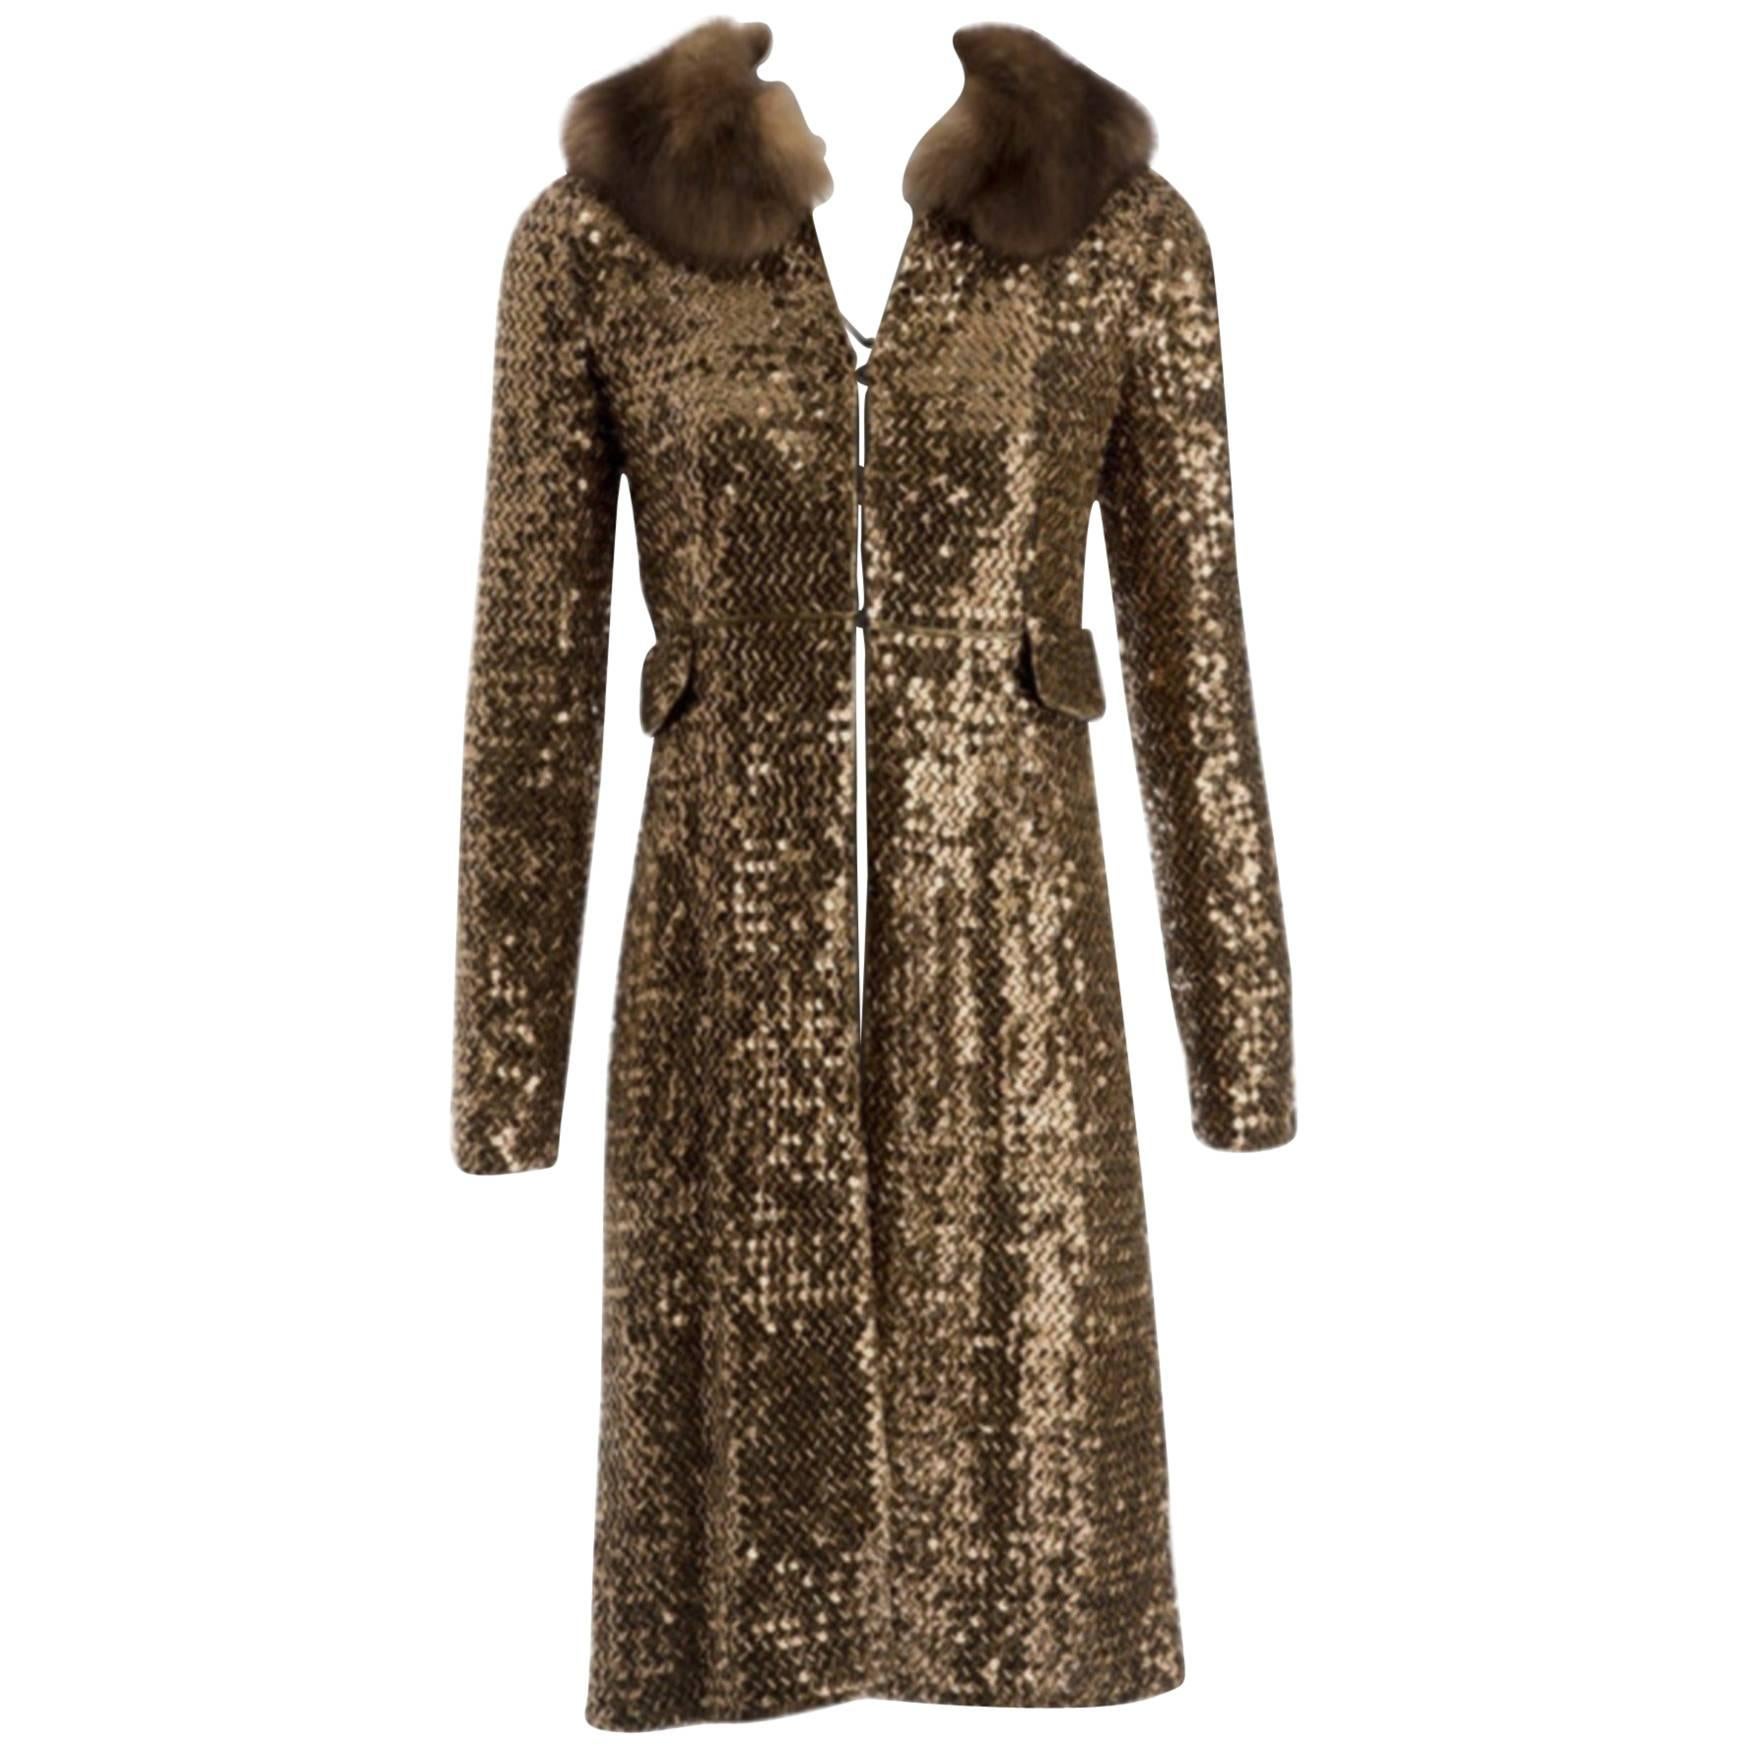 Limited Edition Spécial Piéce Fur and Sequined Dolce & Gabbana Coat Size 38 IT  For Sale